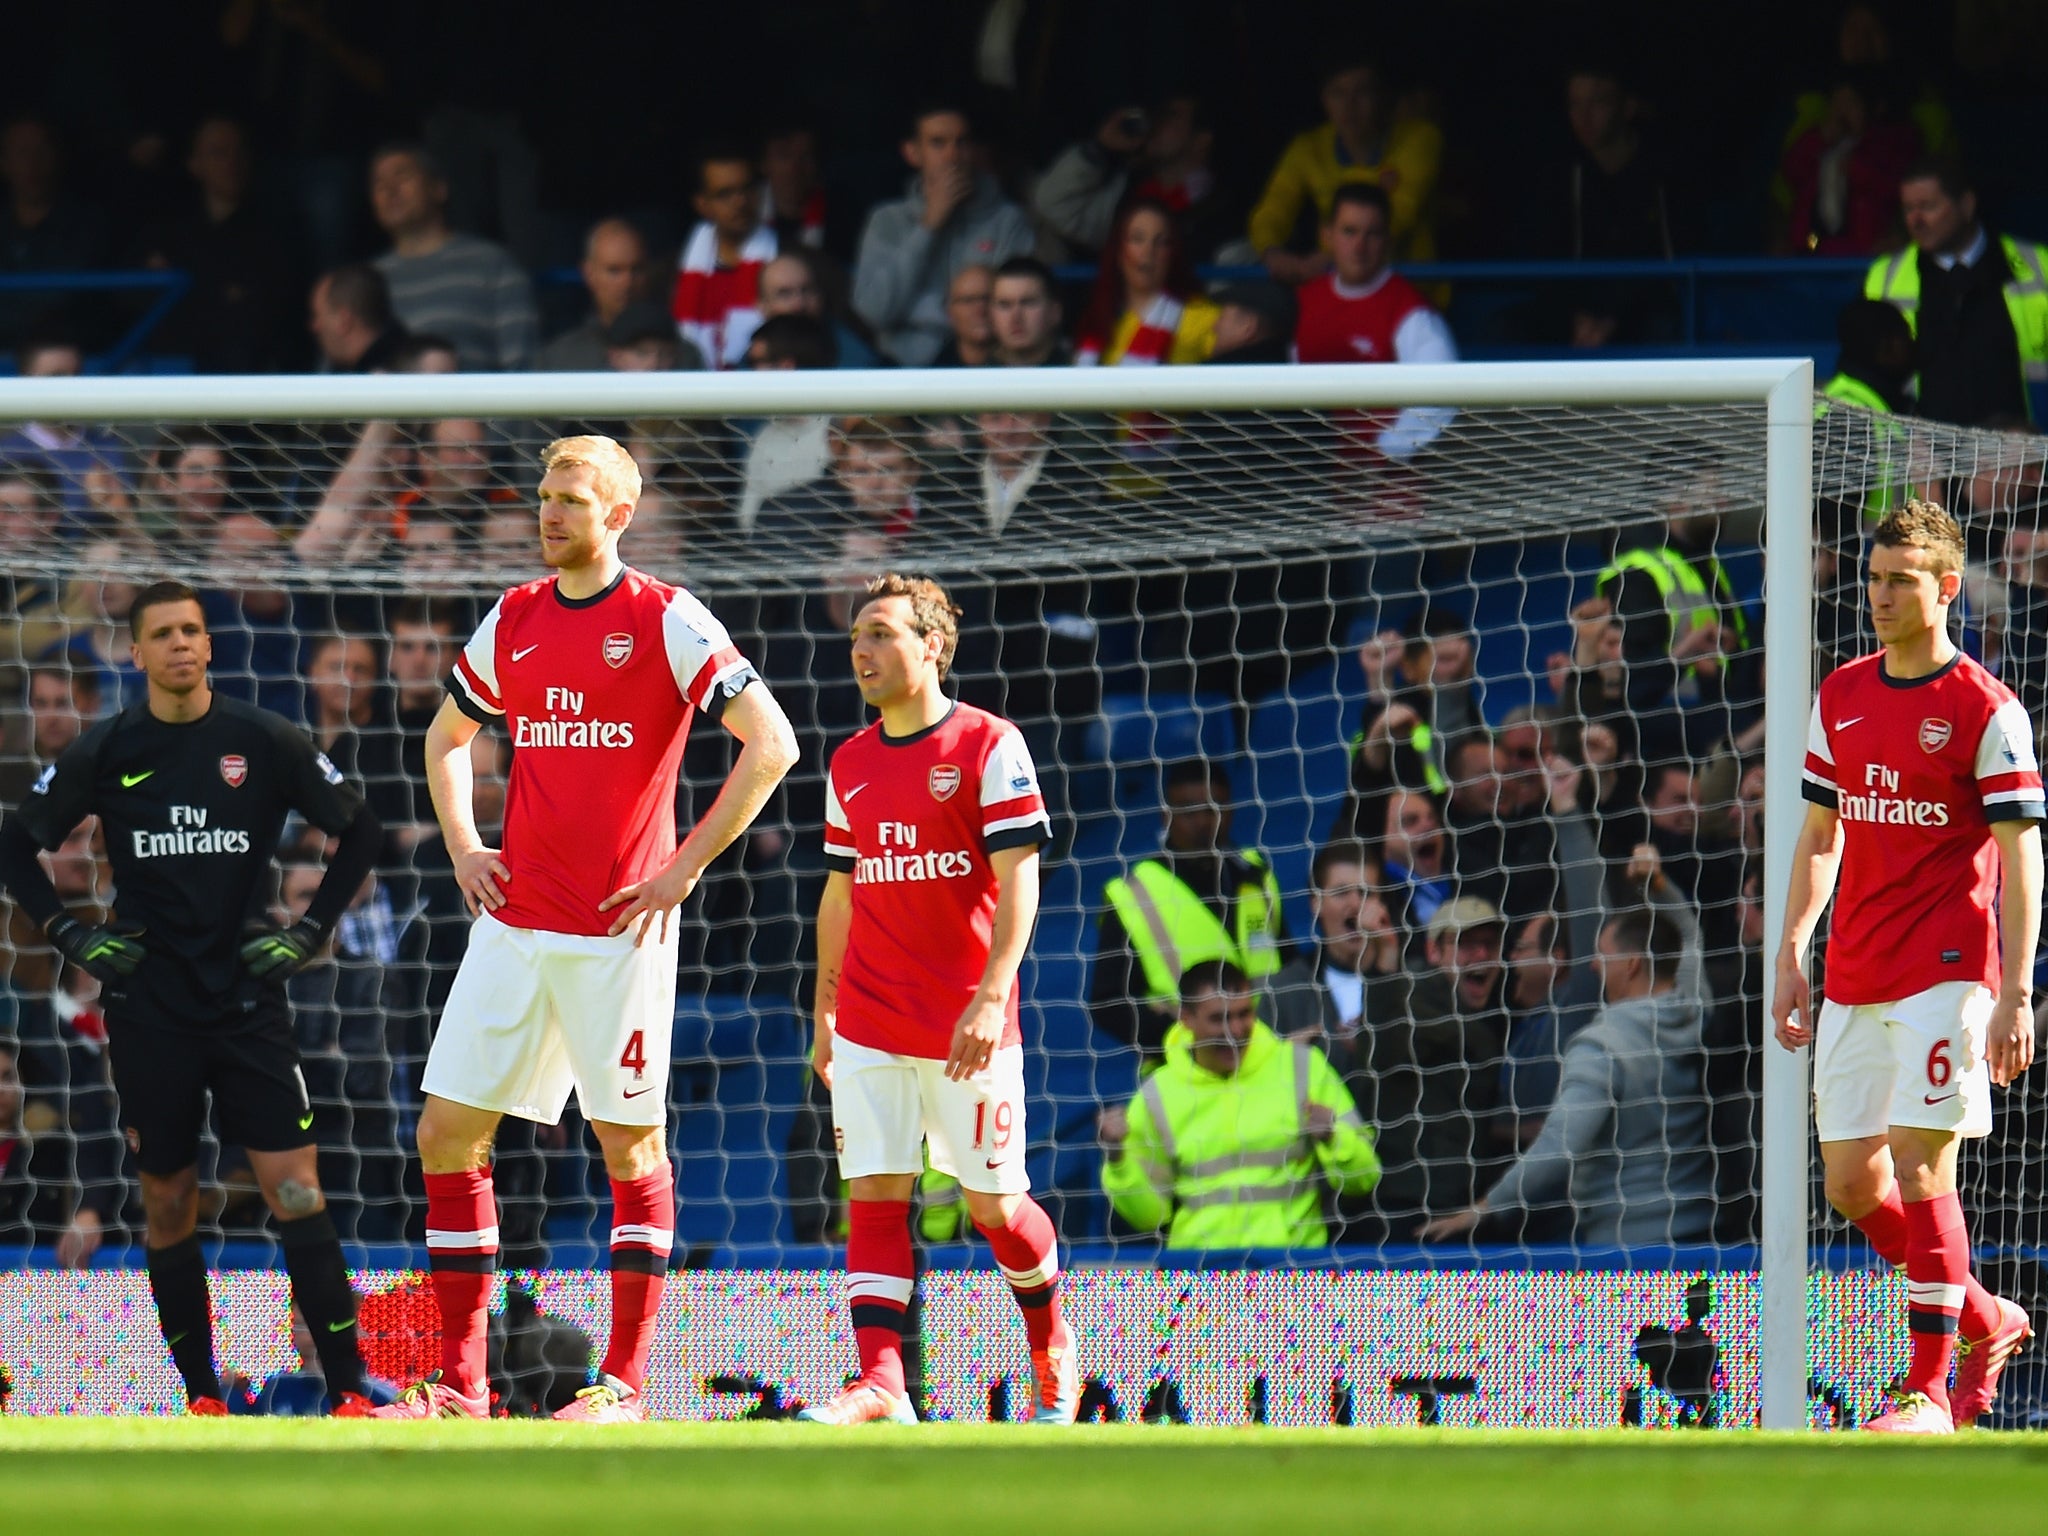 Arsenal players look on despairingly after going 2-0 down early to Chelsea